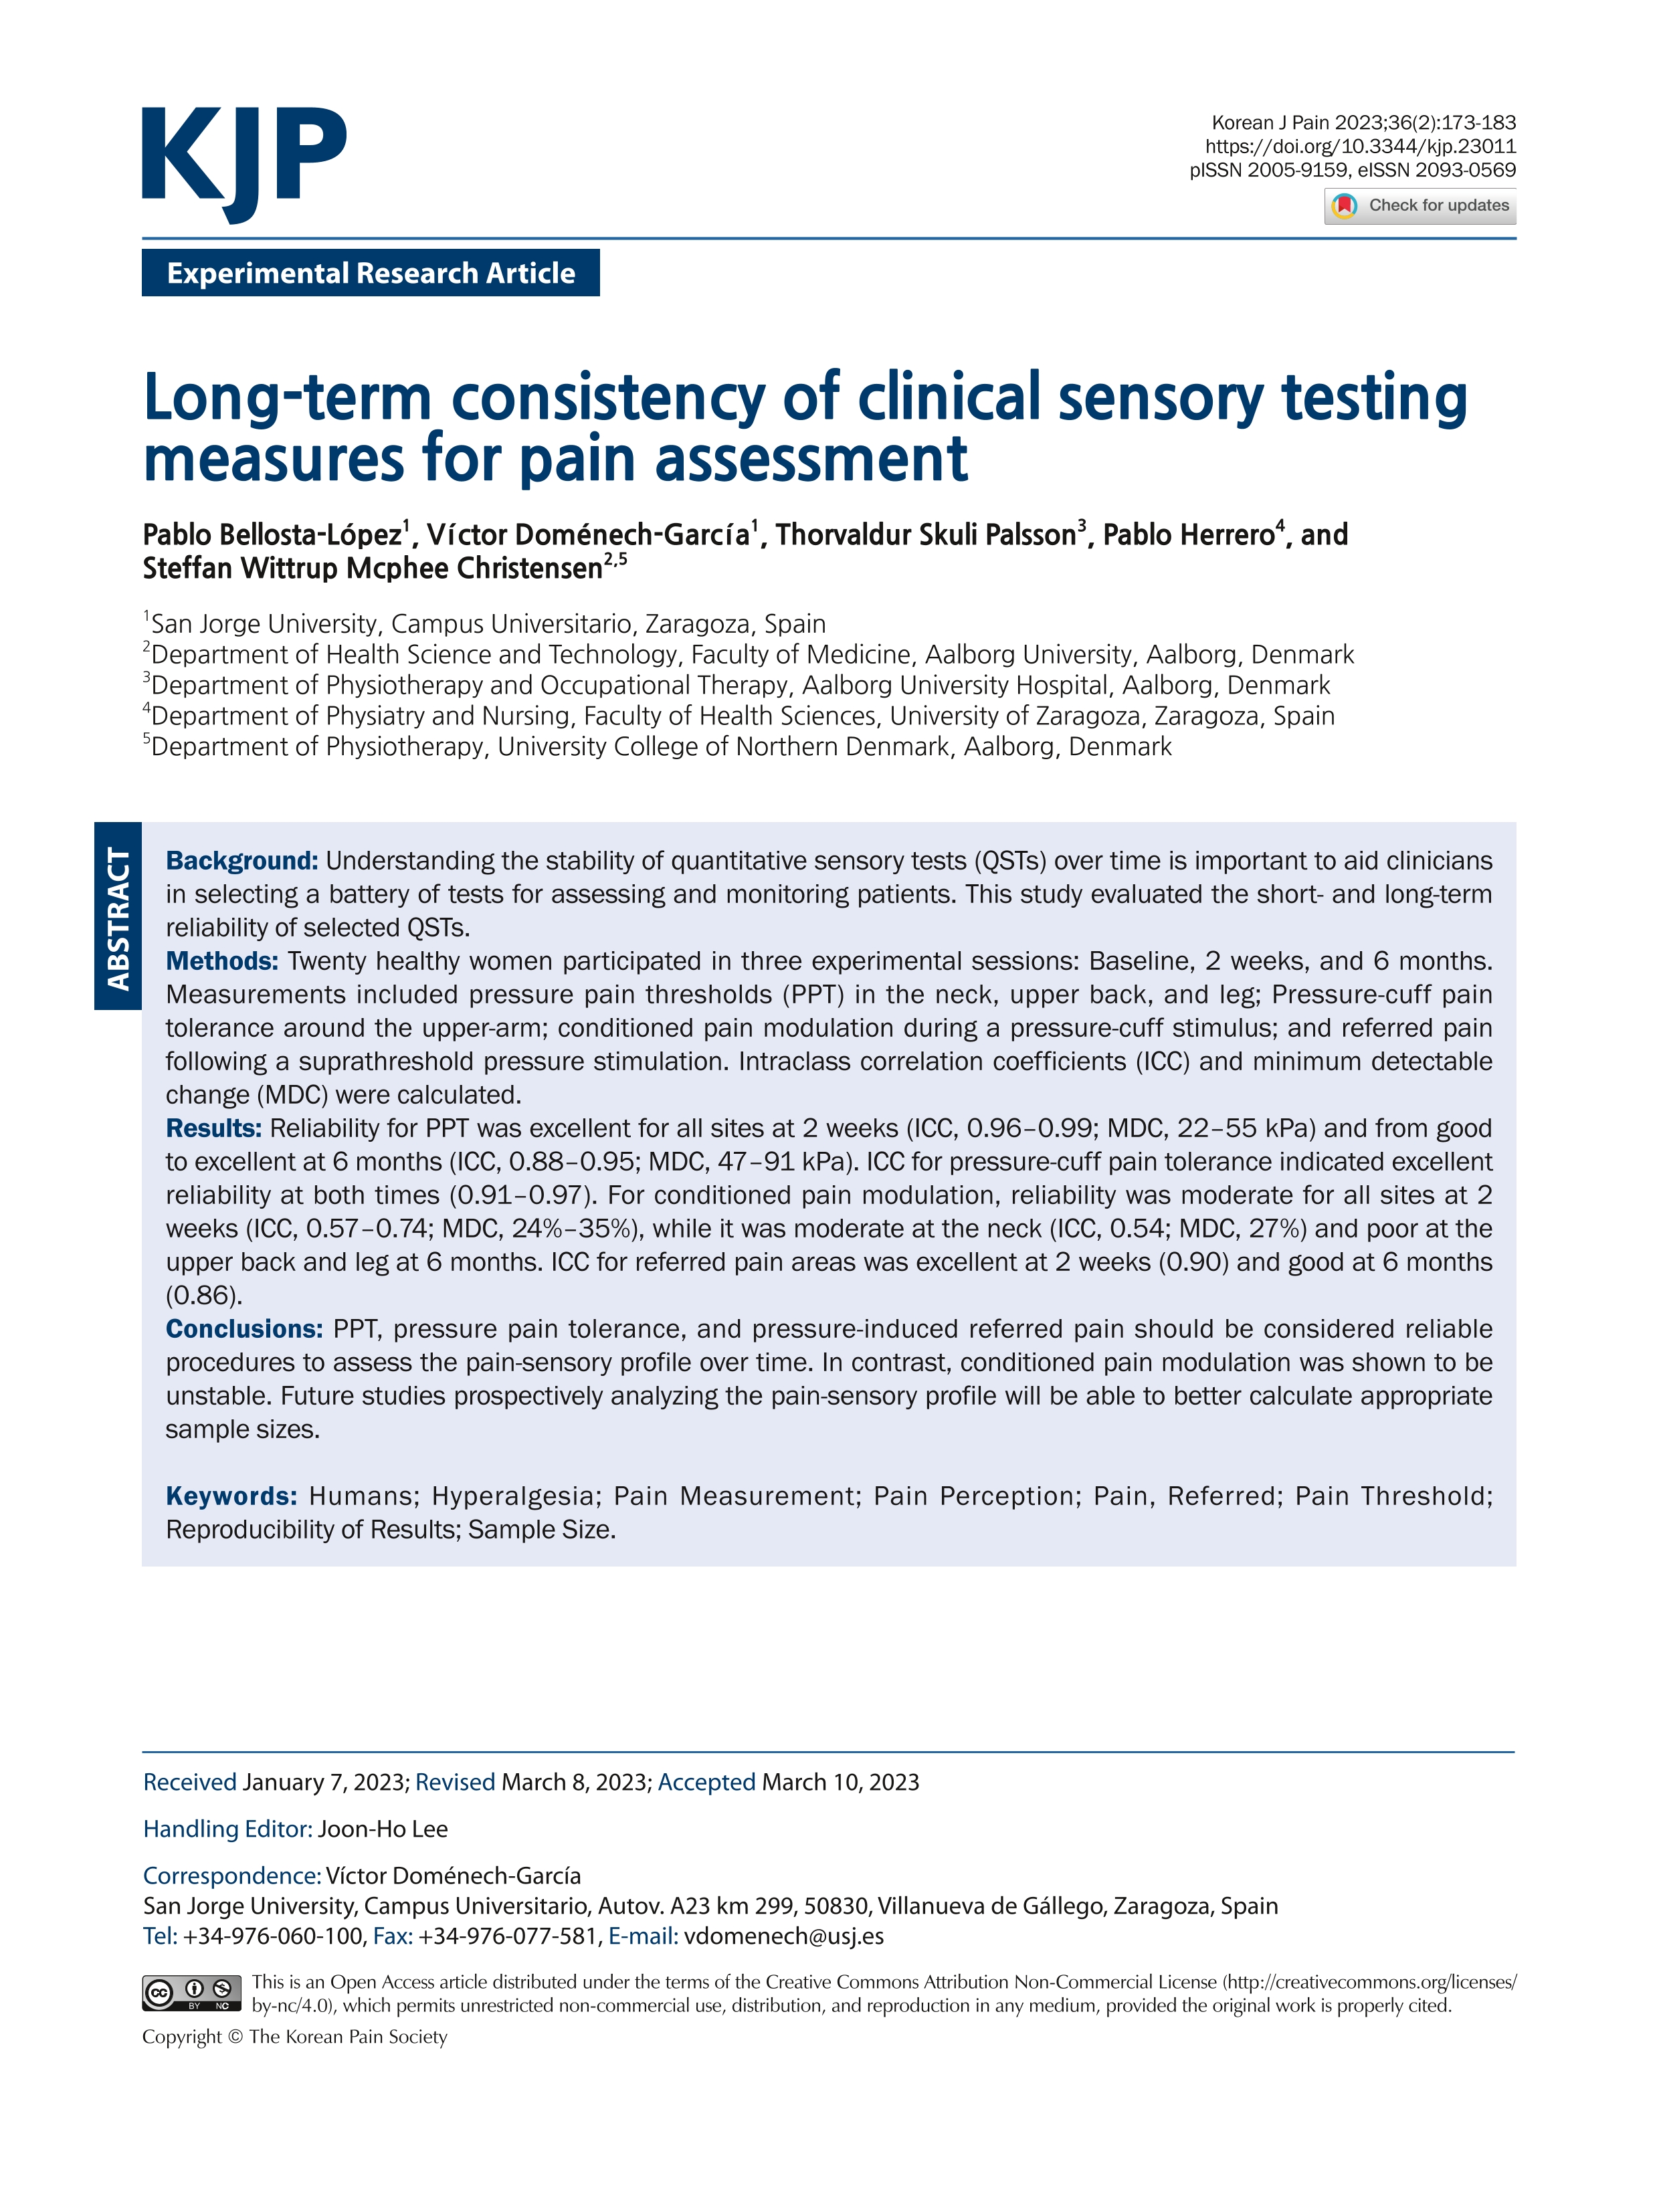 Long-term consistency of clinical sensory testing measures for pain assessment